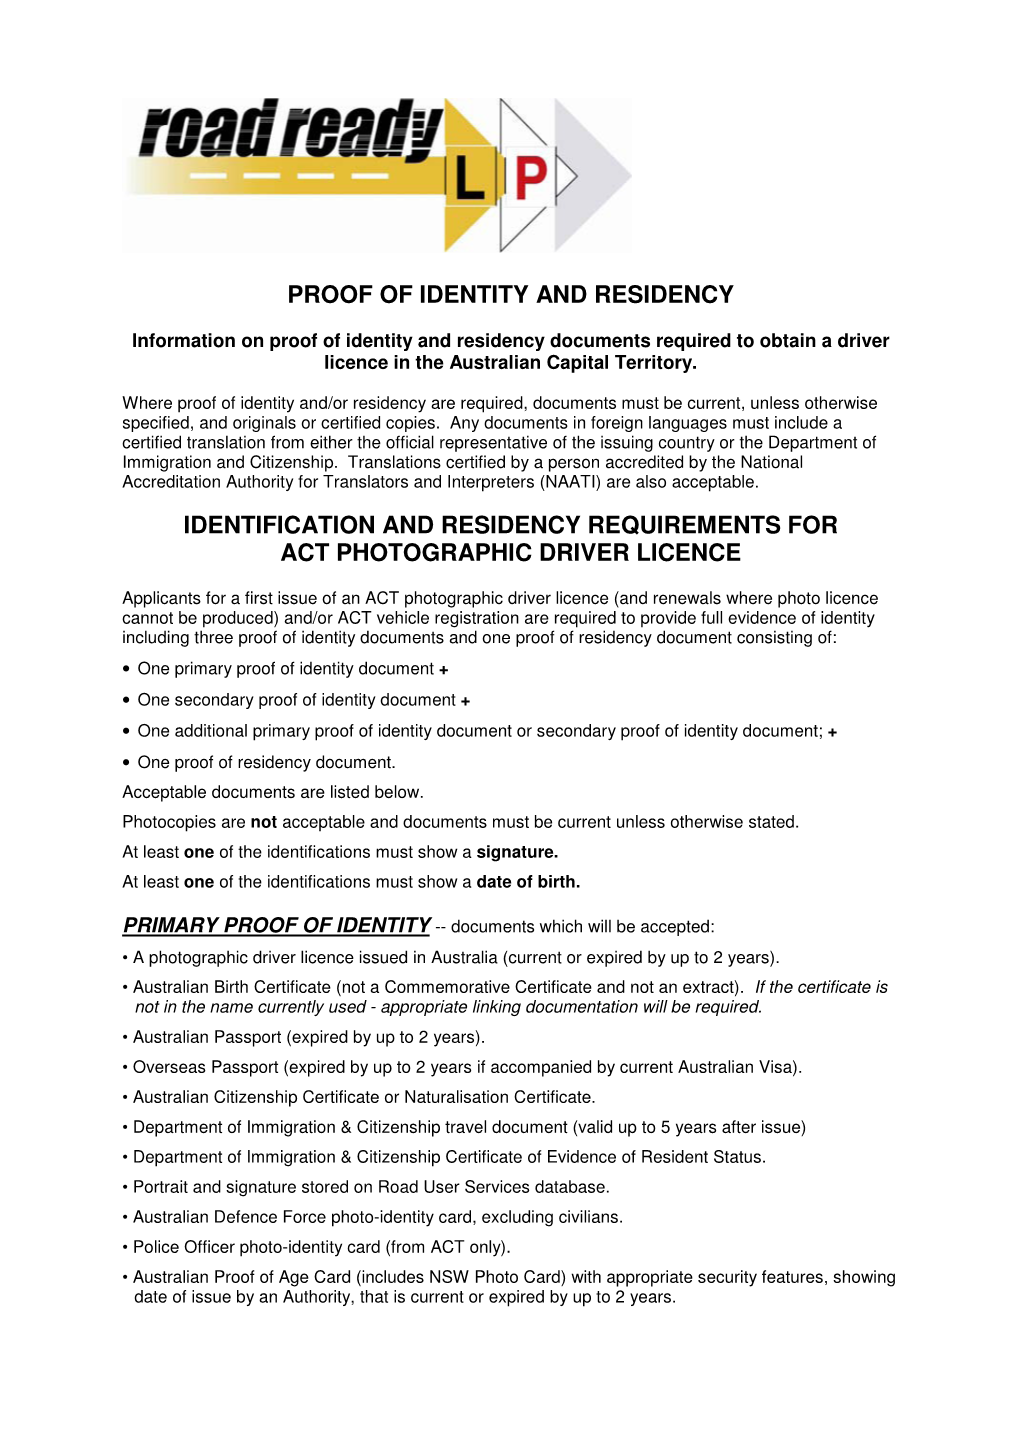 Proof of Identity and Residency Identification